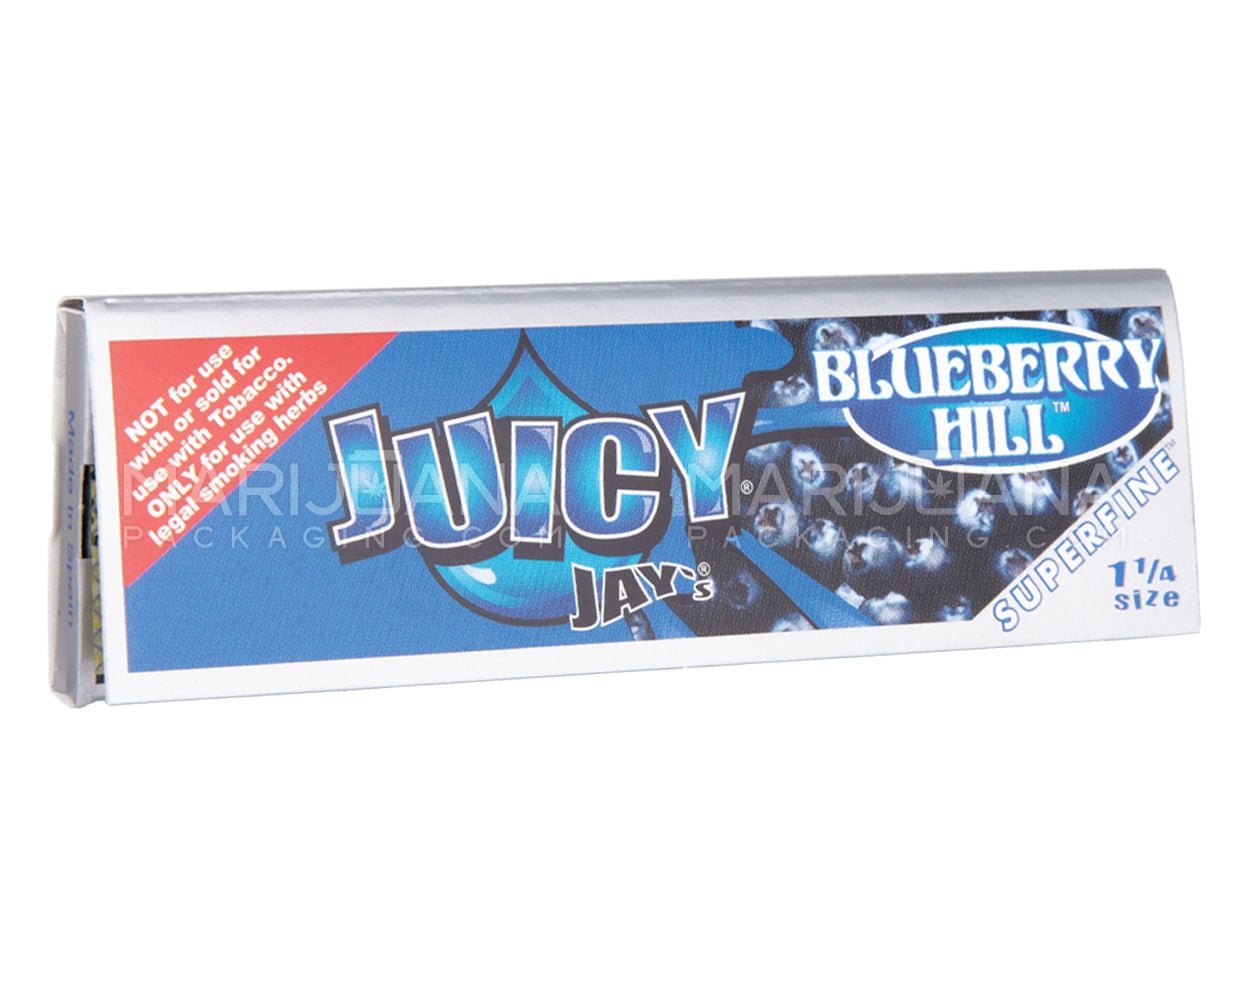 JUICY JAY'S | 'Retail Display' 1 1/4 Size Hemp Rolling Papers | 76mm - Blueberry - 24 Count - 3